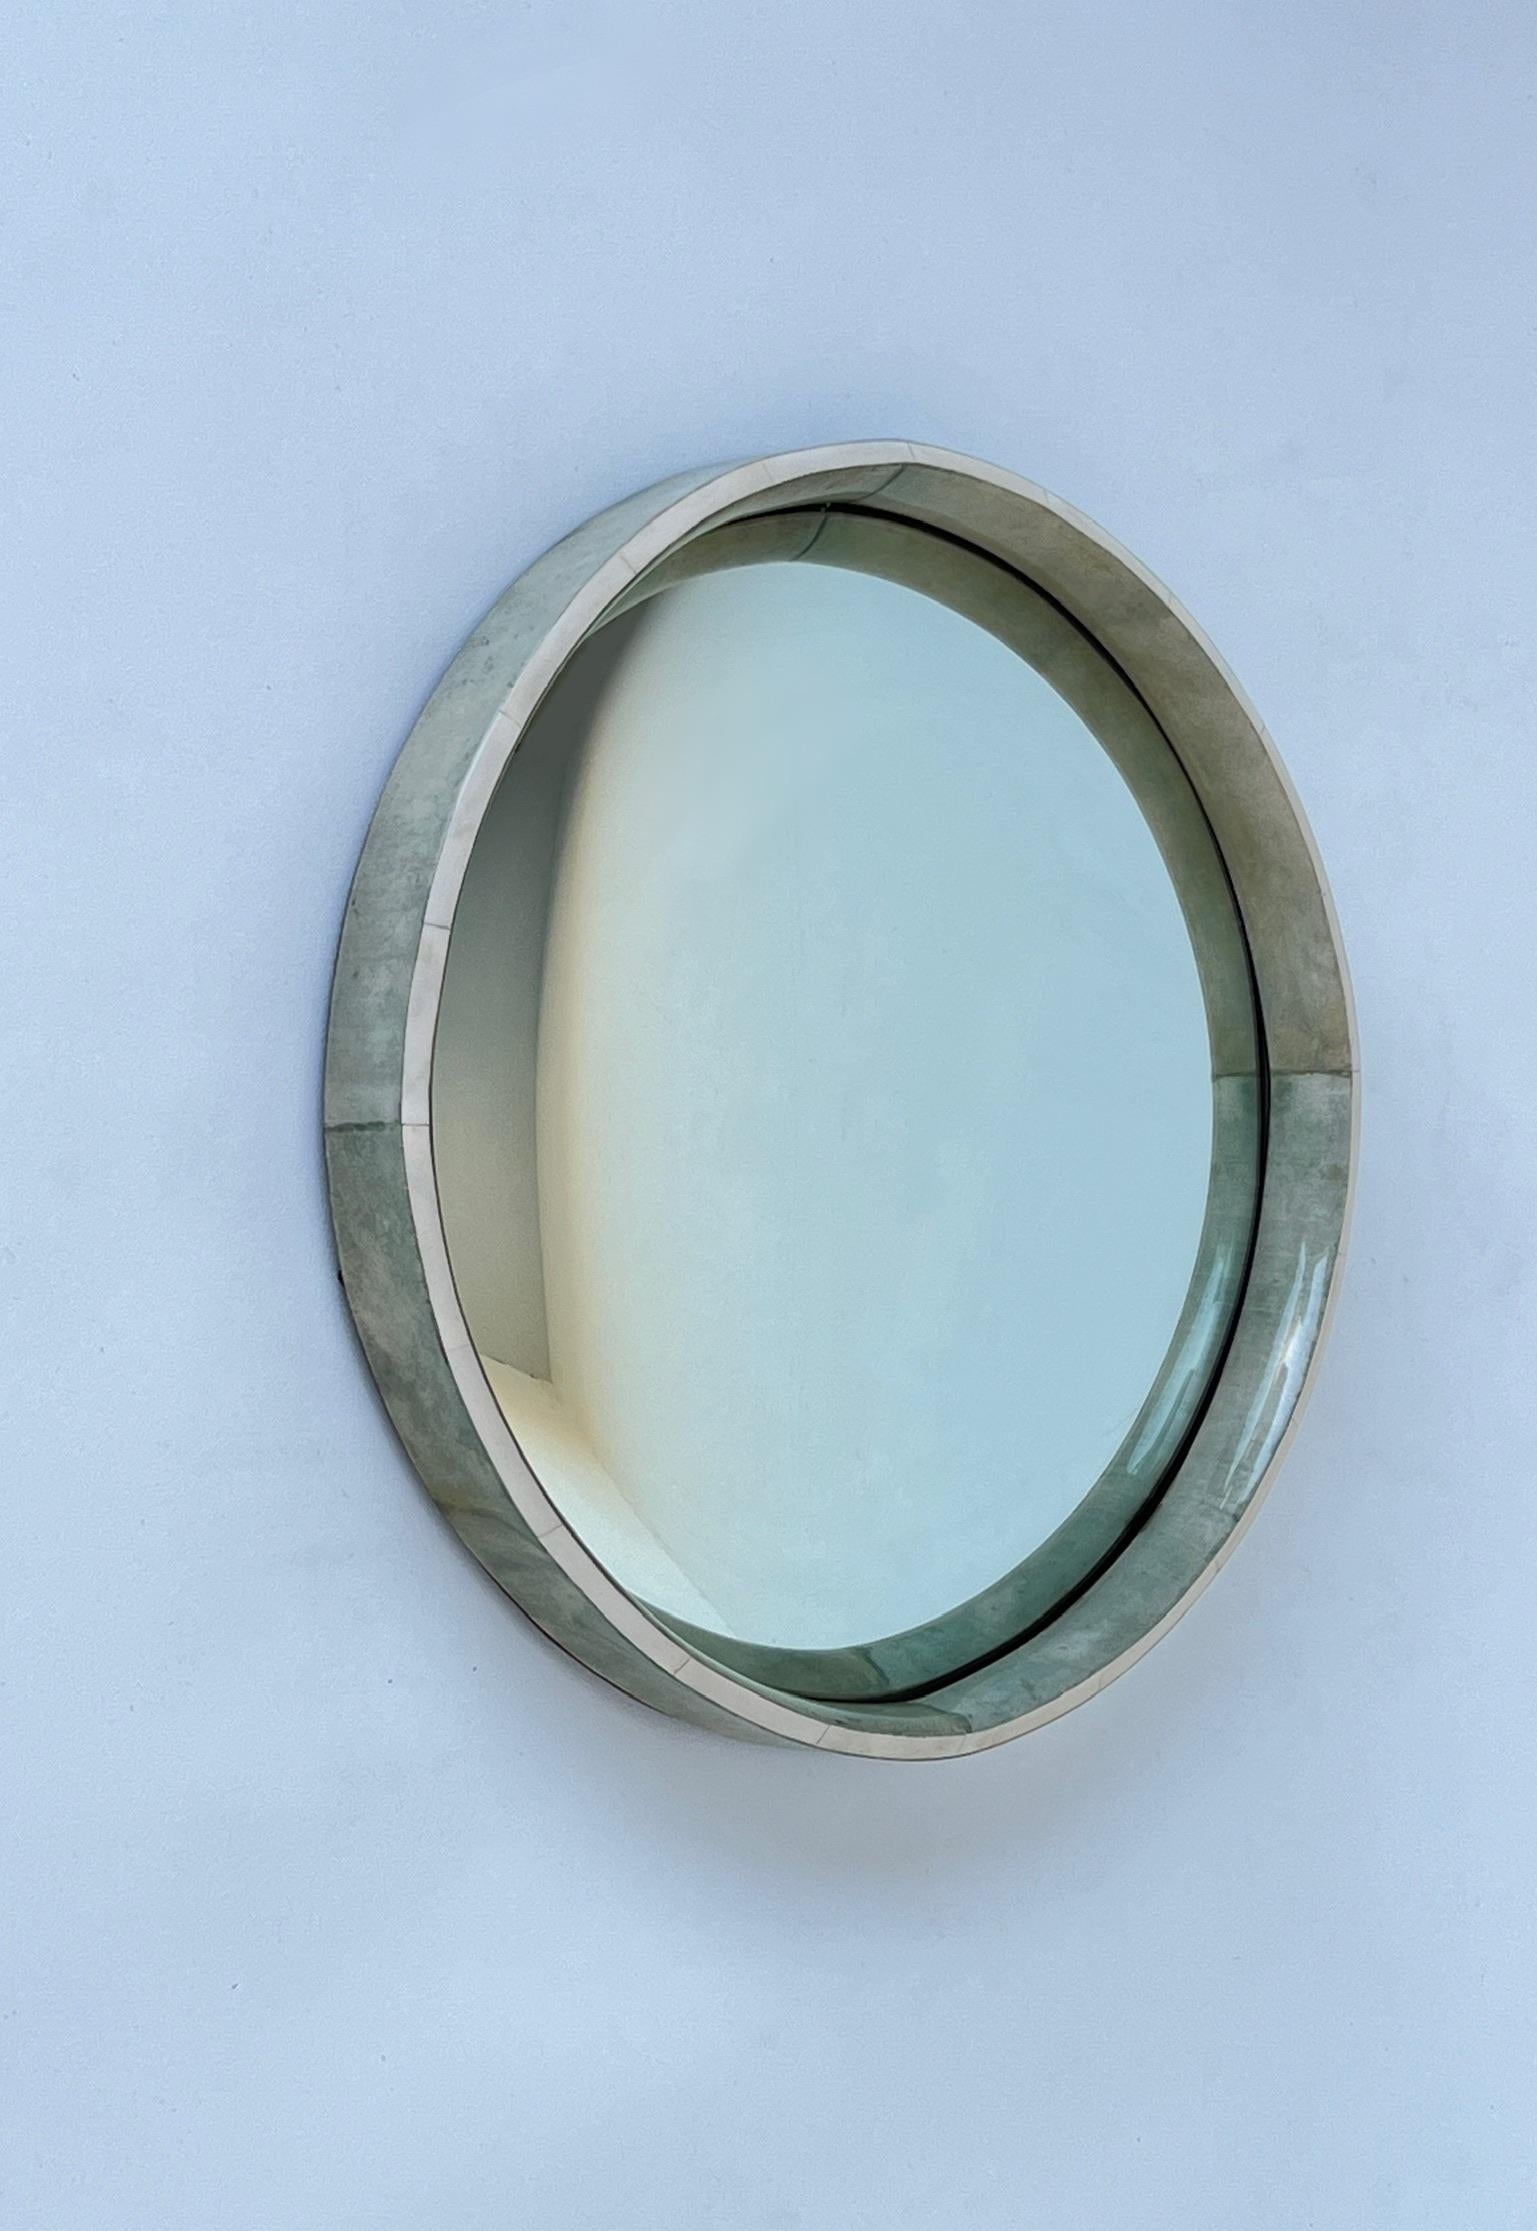 Green Goatskin Parchment and Bone Round Convex  Mirror by Aldo Tura  In Good Condition For Sale In Palm Springs, CA